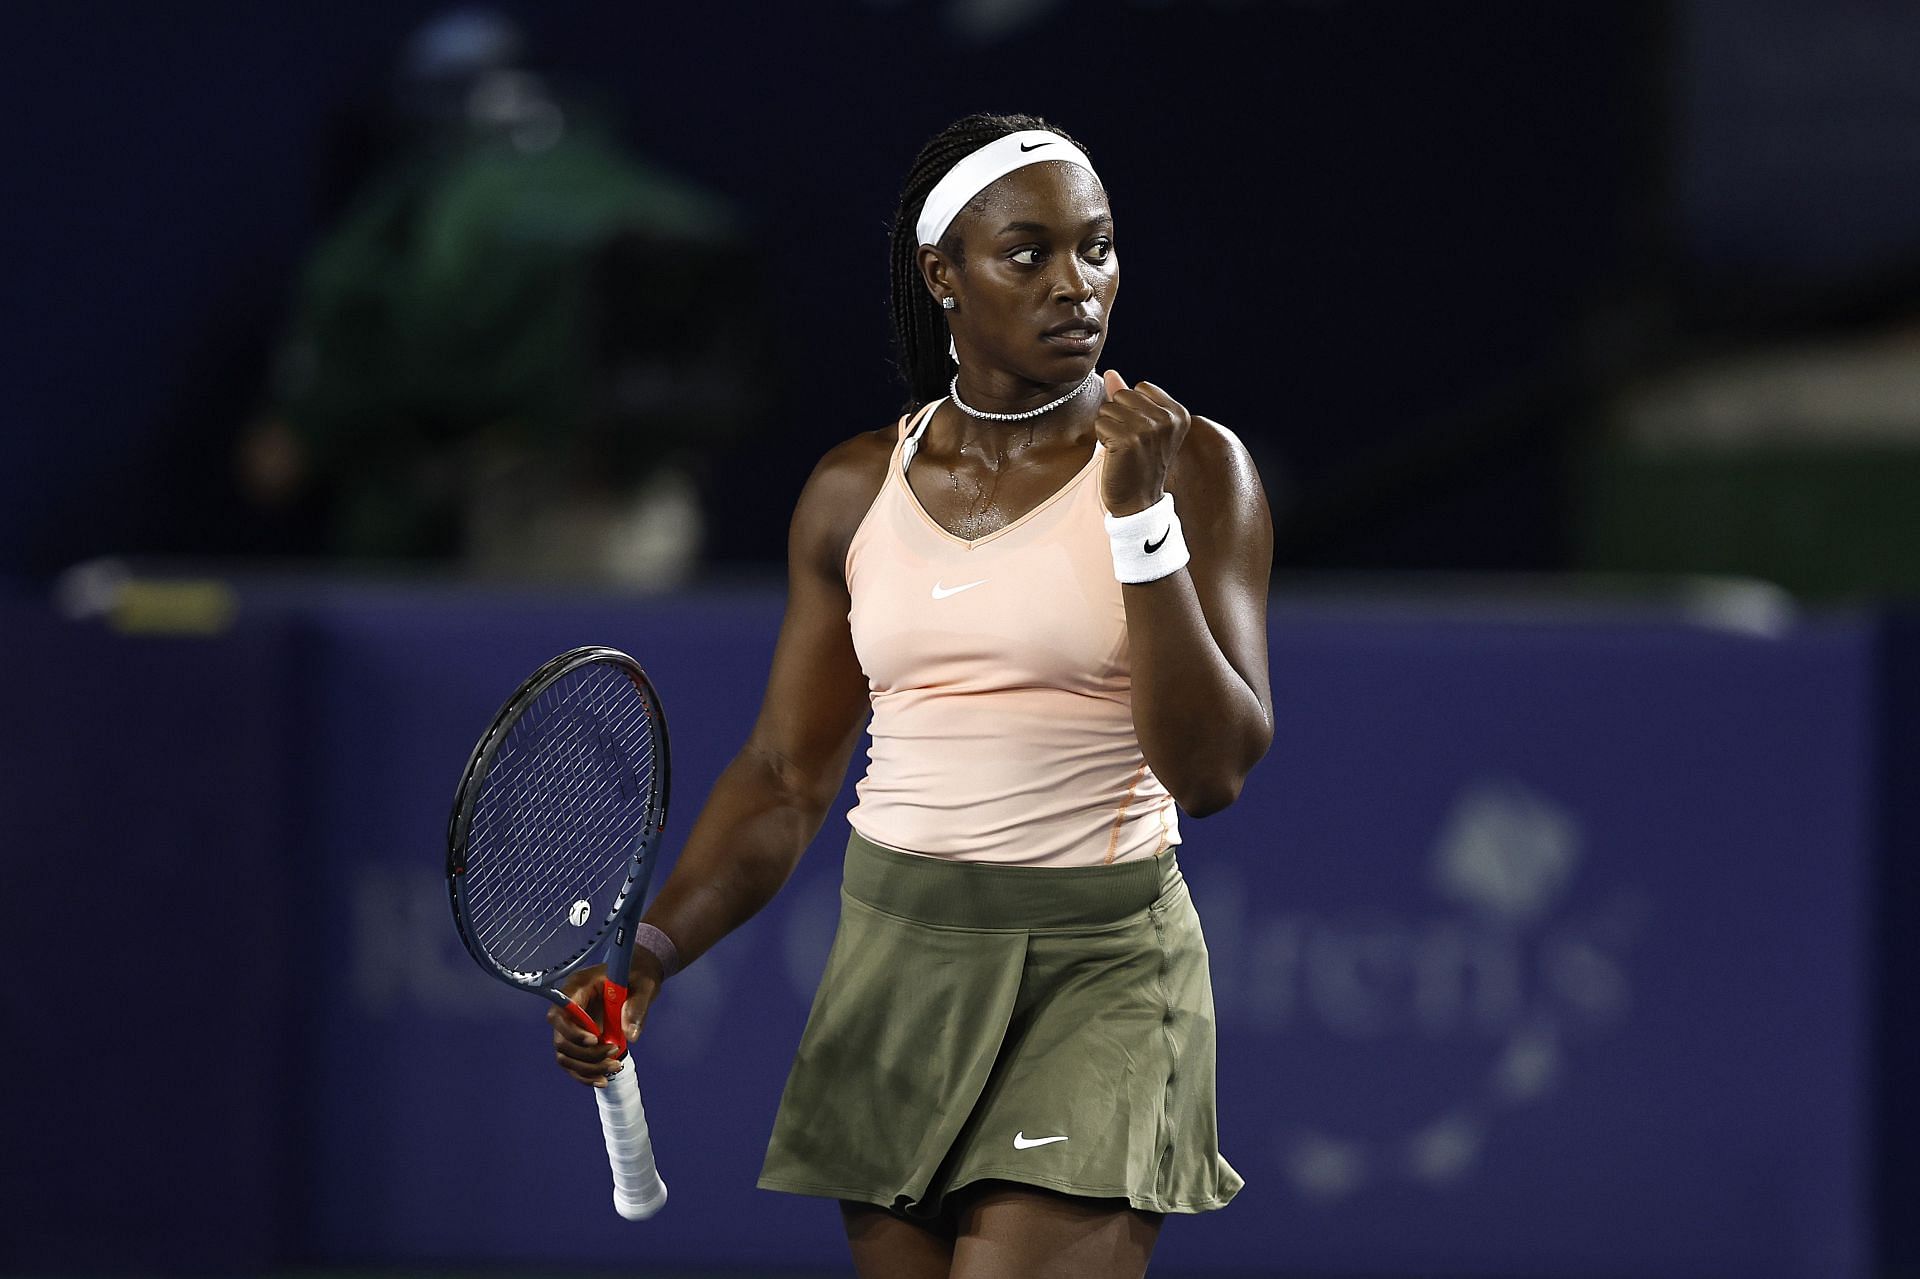 Sloane Stephens is currently ranked at No. 37